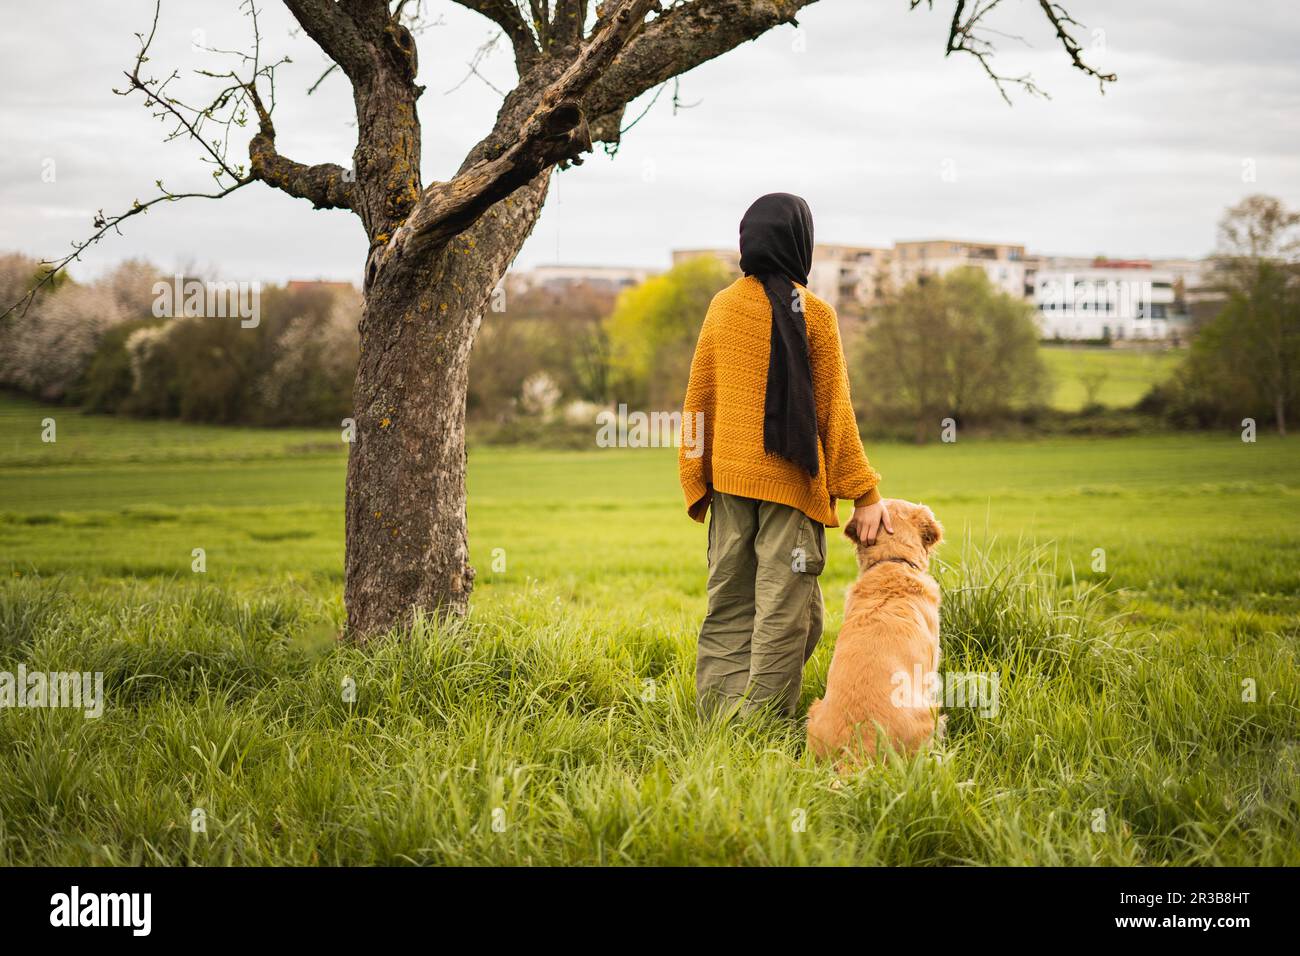 young muslim girl standing with a dog, two best friends under a tree in a park while watching the view on a walk Stock Photo